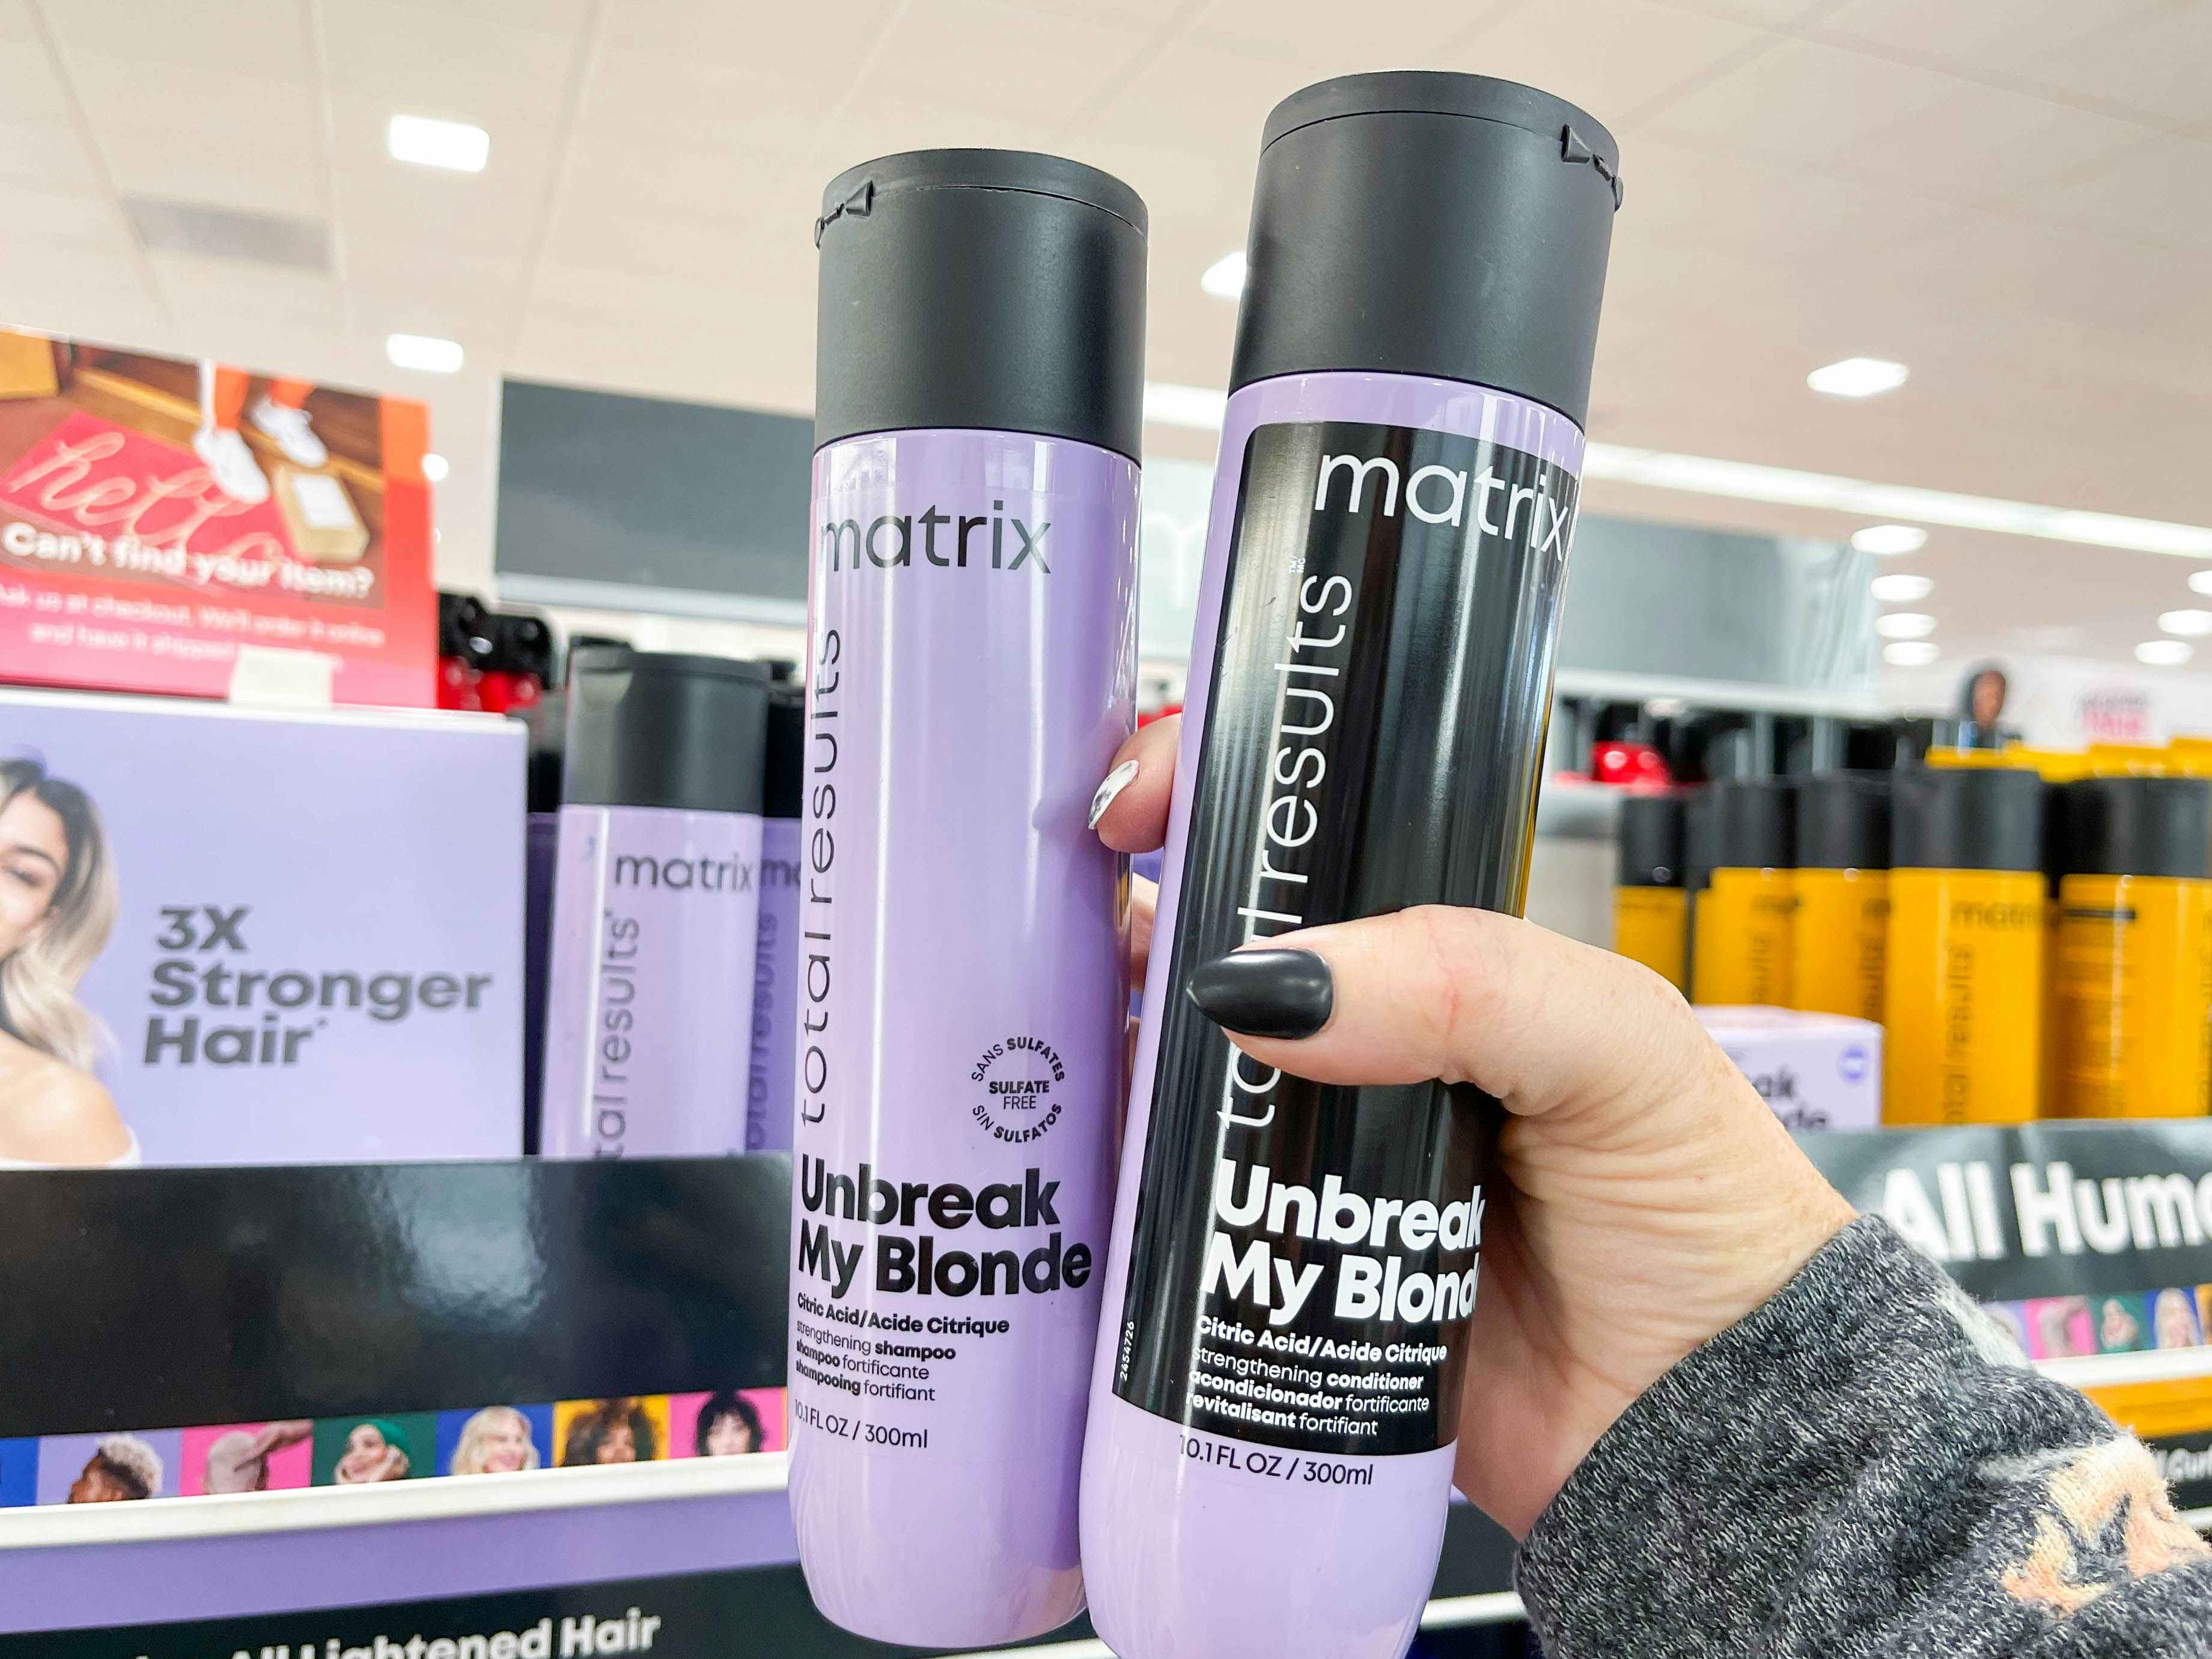 matrix shampoo and conditioner being held in front of shelf